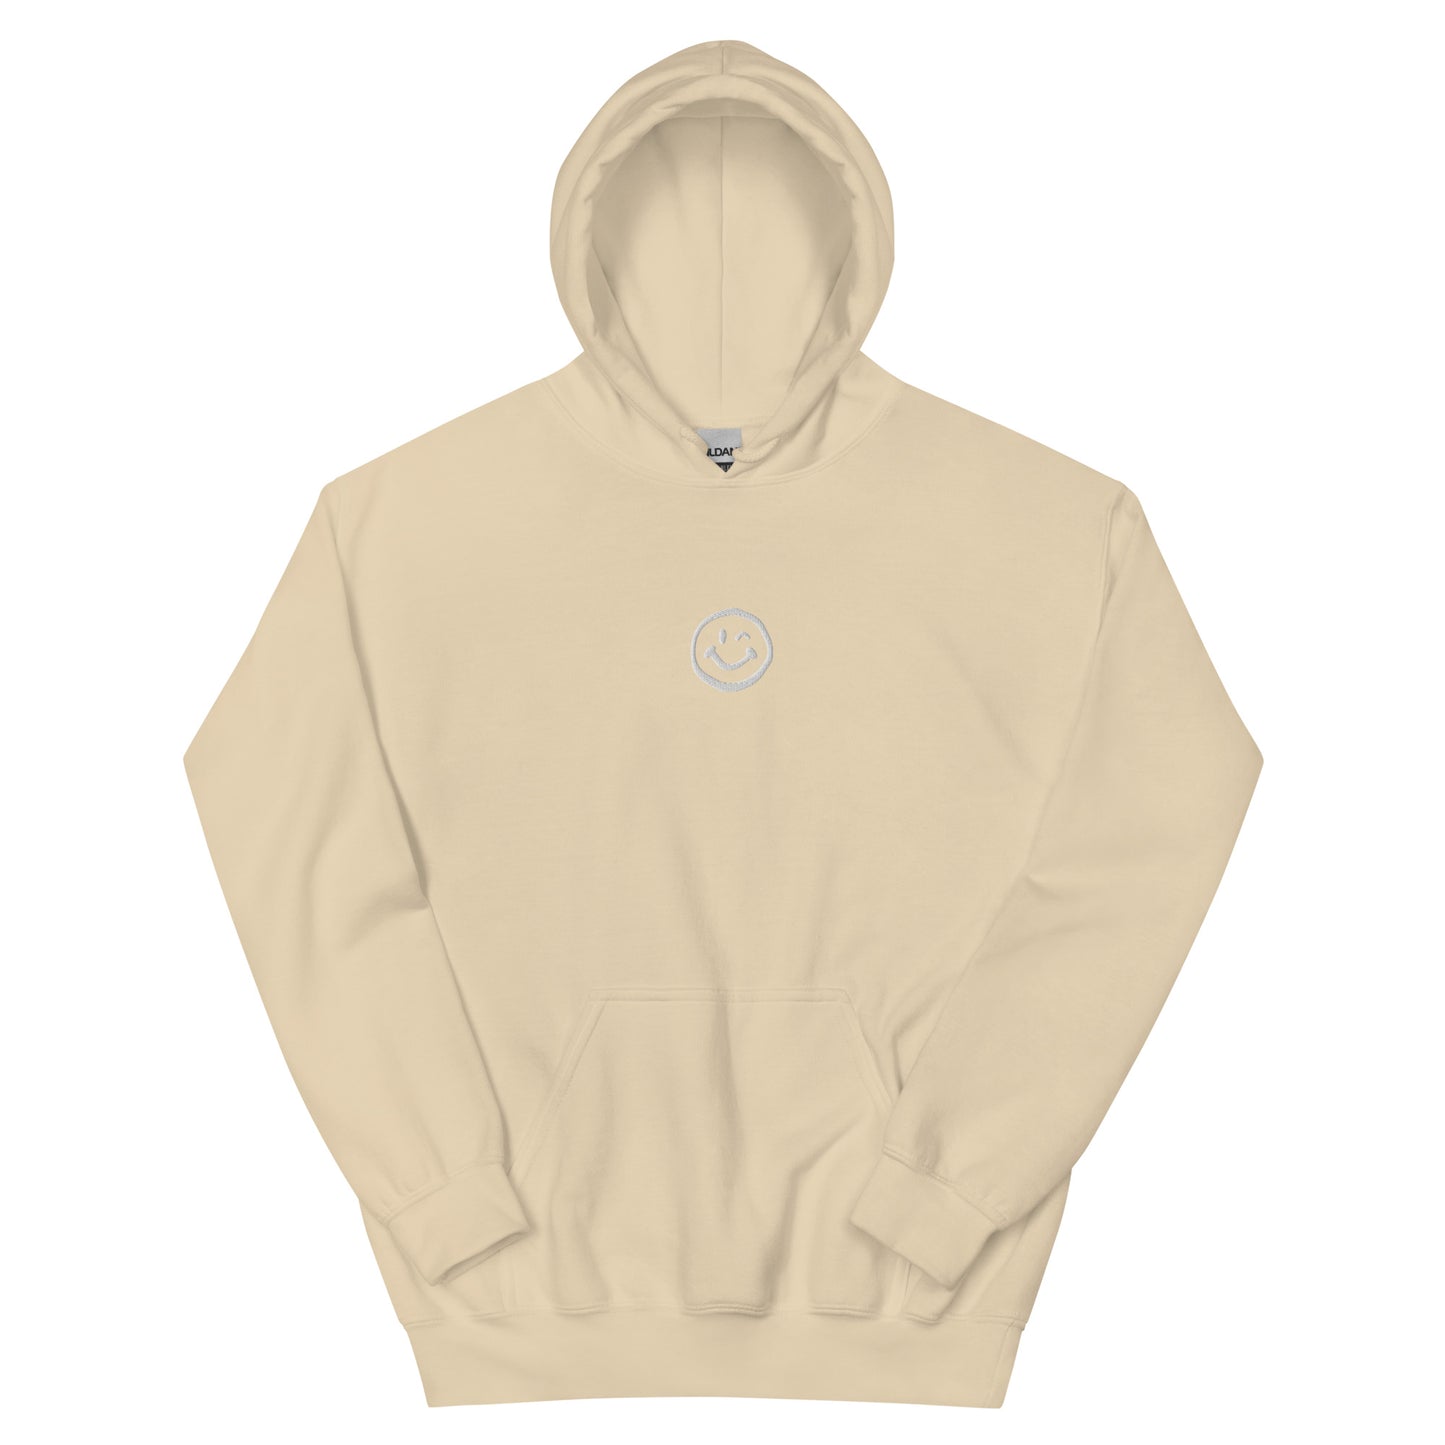 Smiley Hoodie - Embroidered